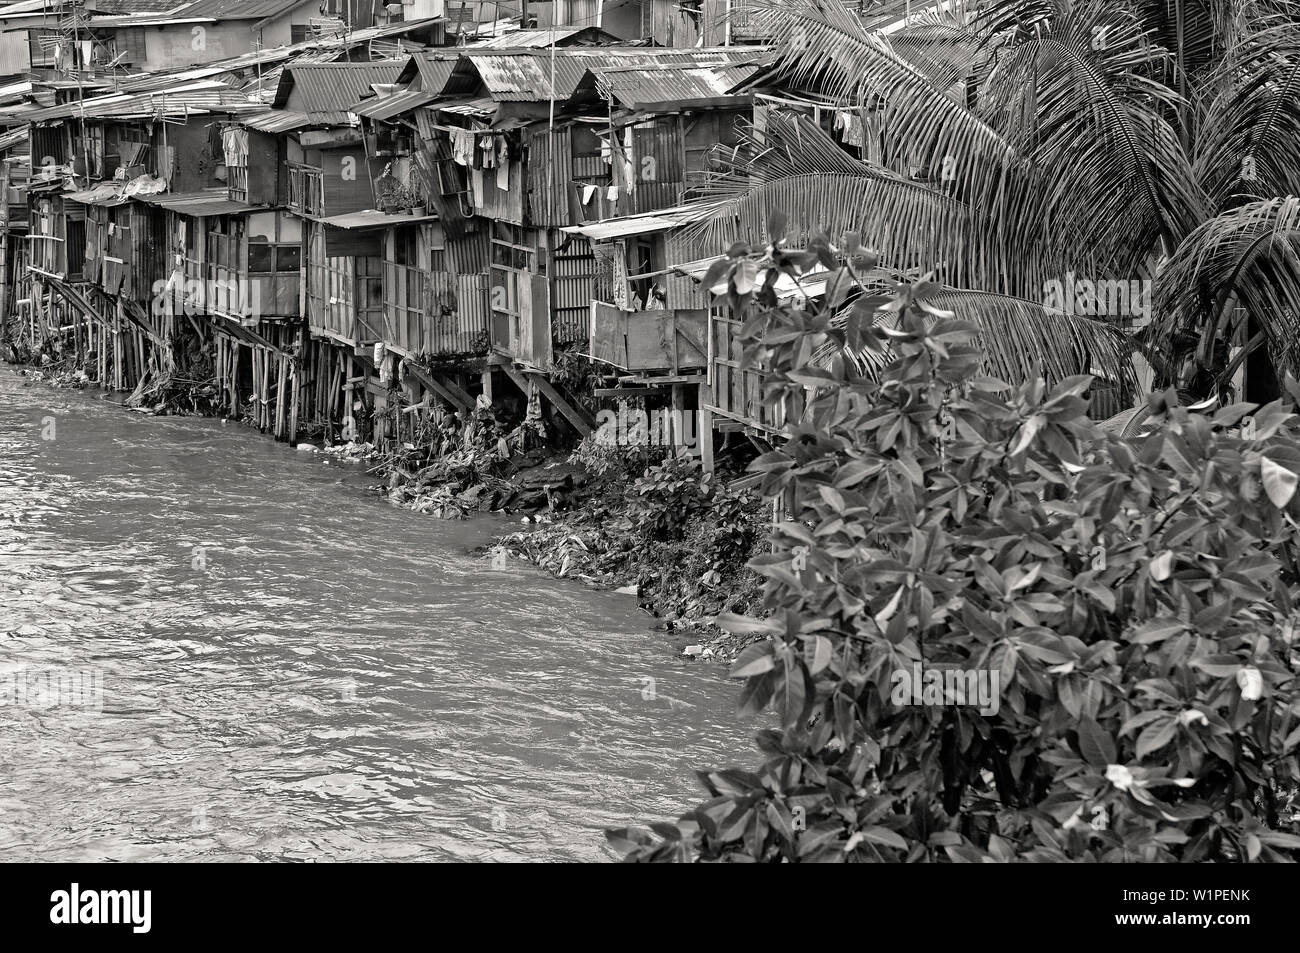 jakarta, indonesia - n2009.11.16: kampung melayu squatter living quarter at the banks of ciliwung river Stock Photo